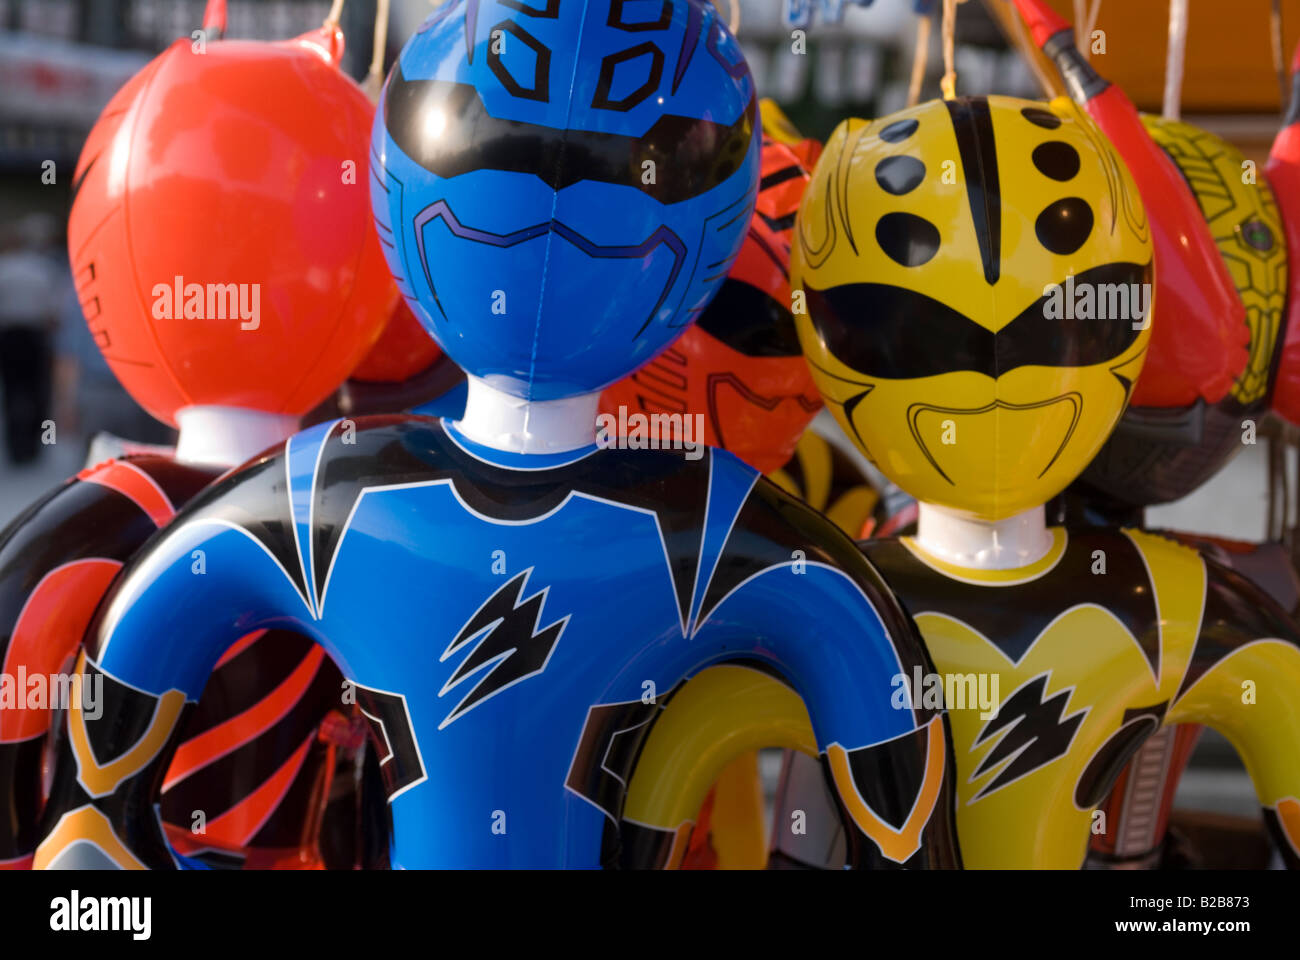 Inflatable action figure super hero Power Rangers for sale as toys for kids at a local festival Stock Photo